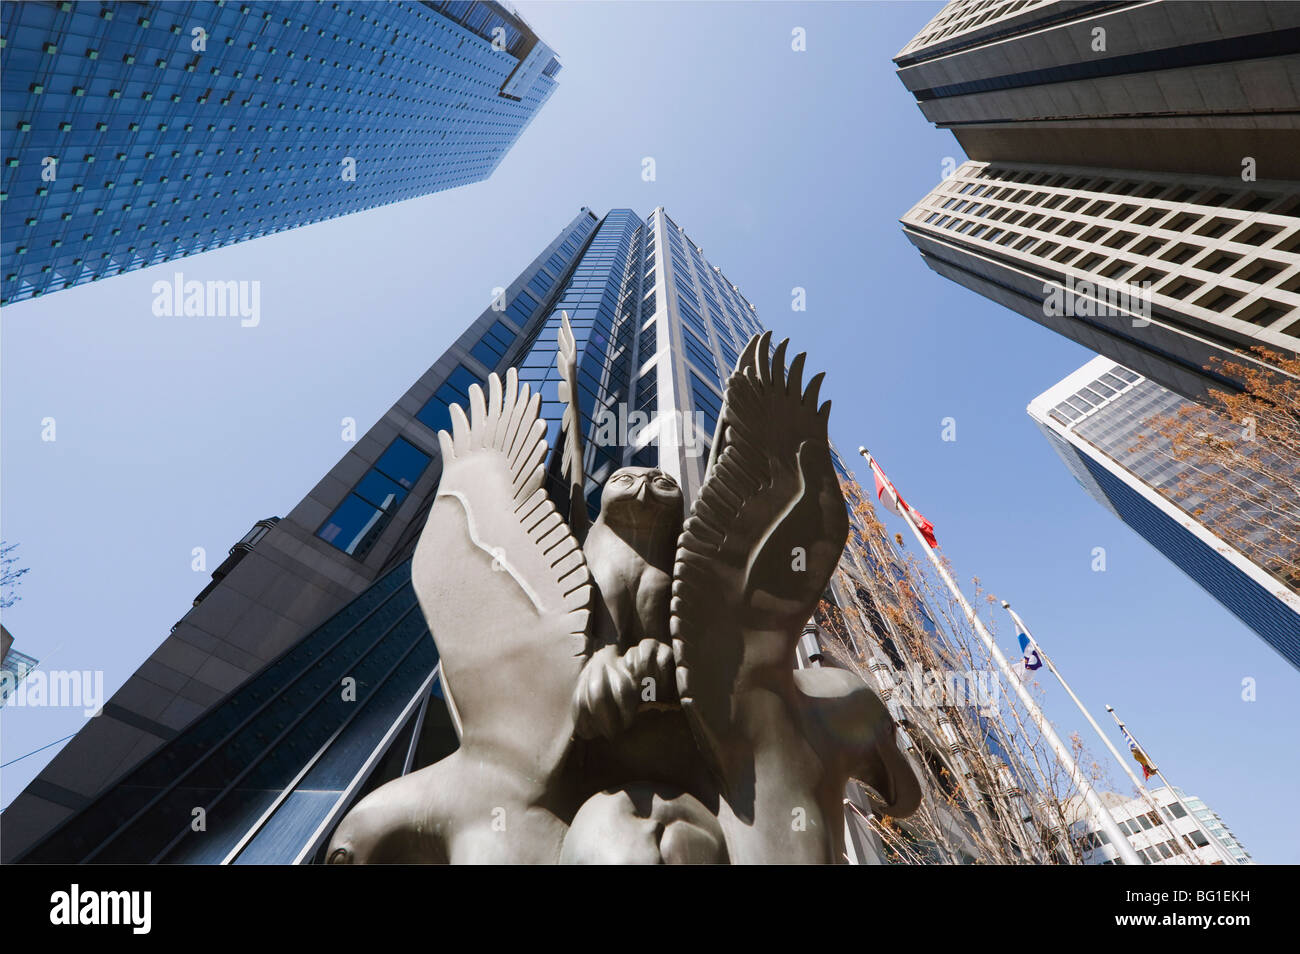 First Nation aboriginal art sculpture and downtown buildings, Vancouver, British Columbia, Canada, North America Stock Photo